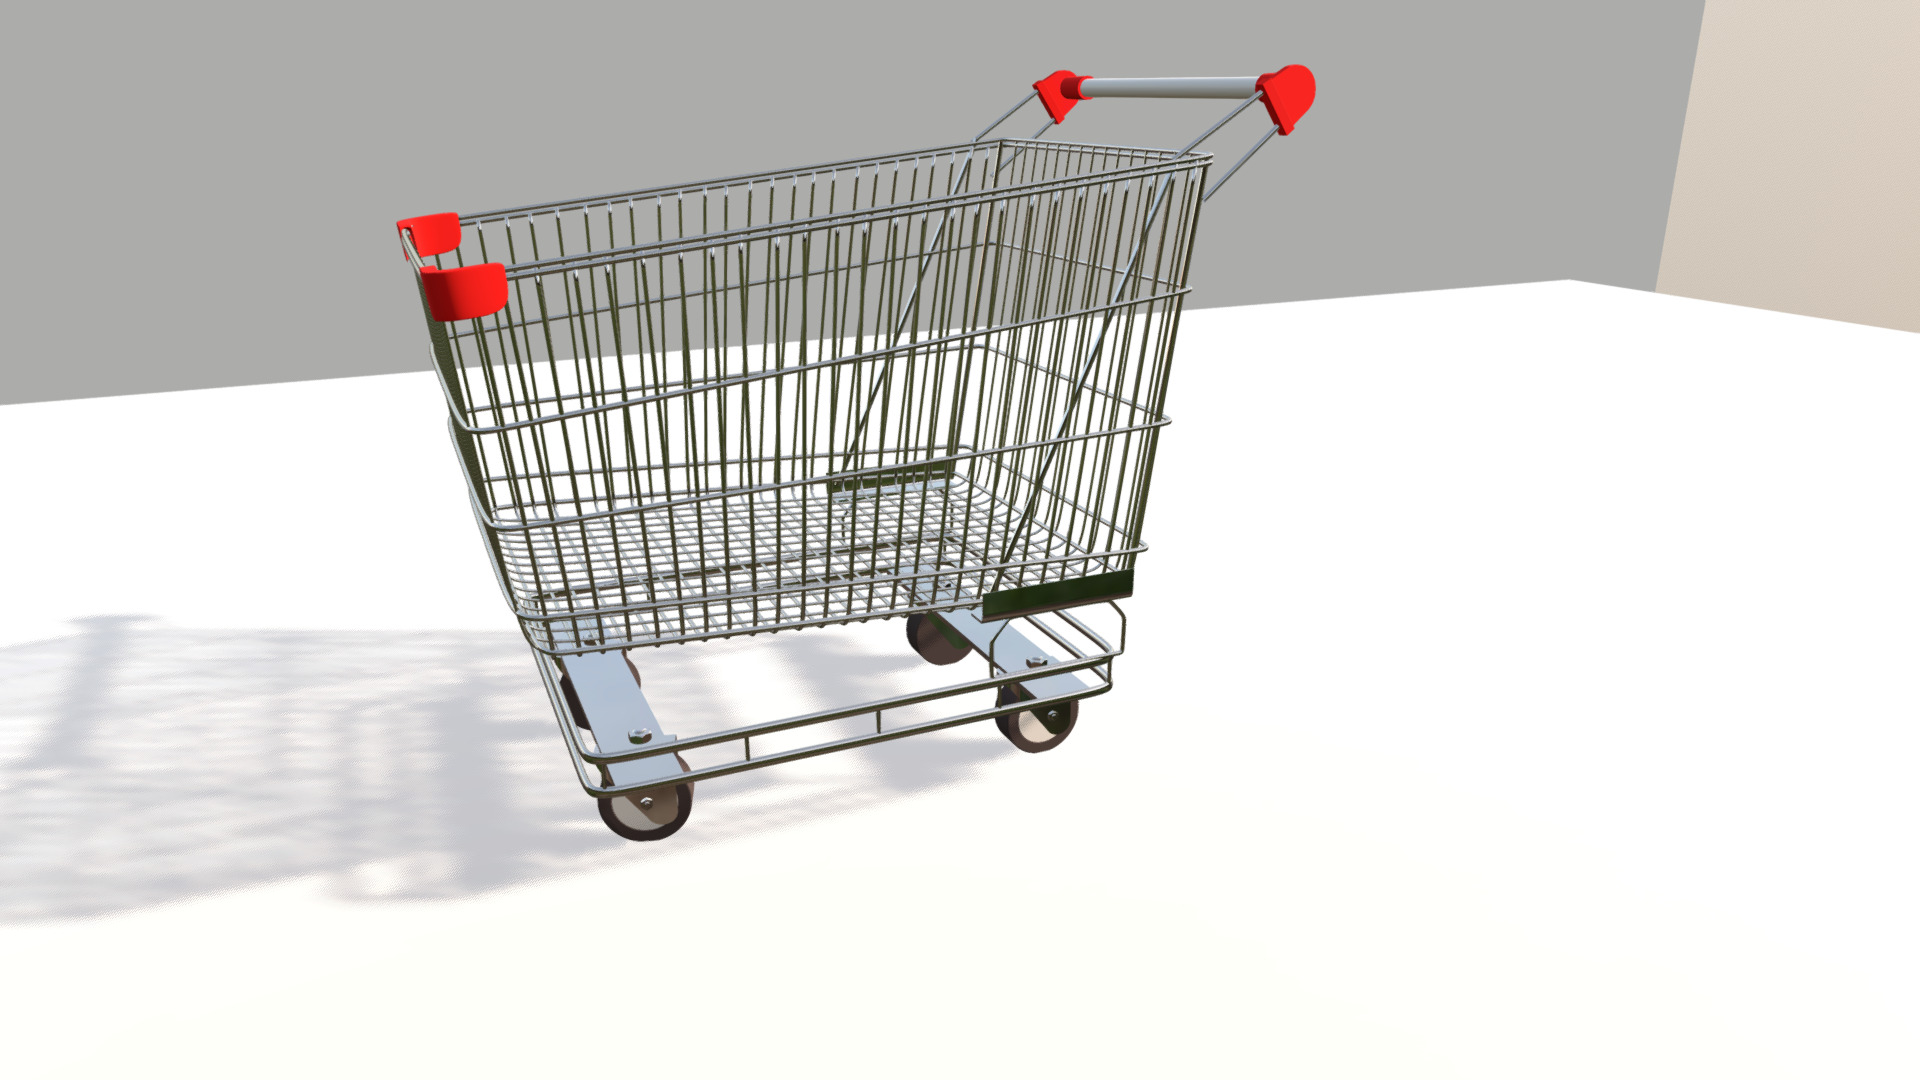 3D model Shoptrolley - This is a 3D model of the Shoptrolley. The 3D model is about a shopping cart with a red and white striped handle.